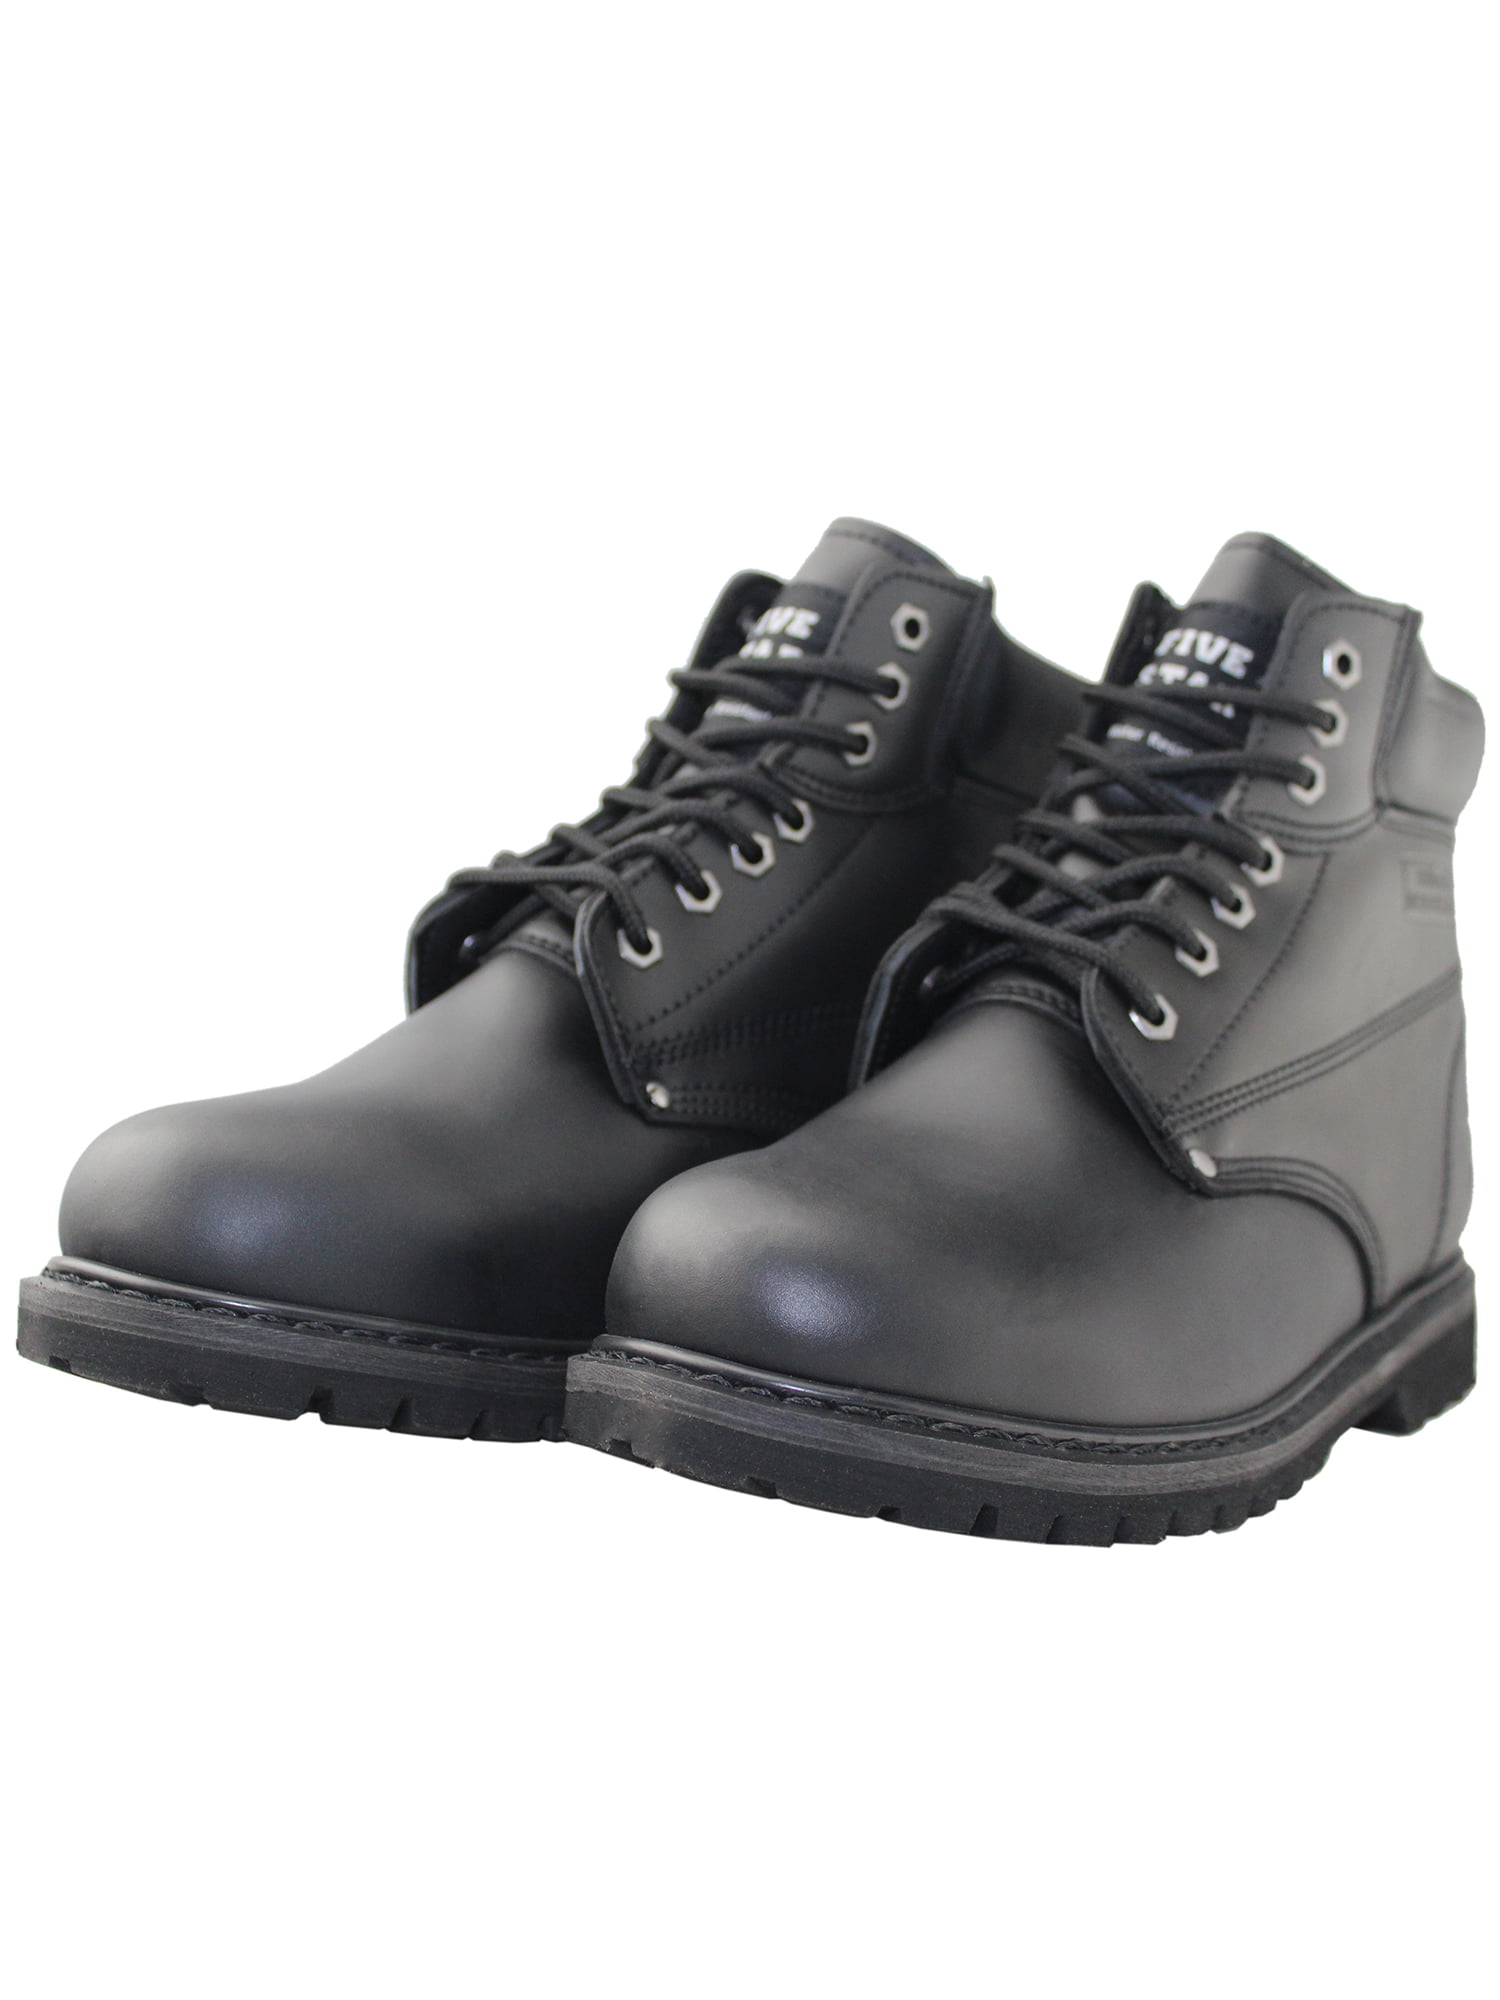 black lace up work shoes